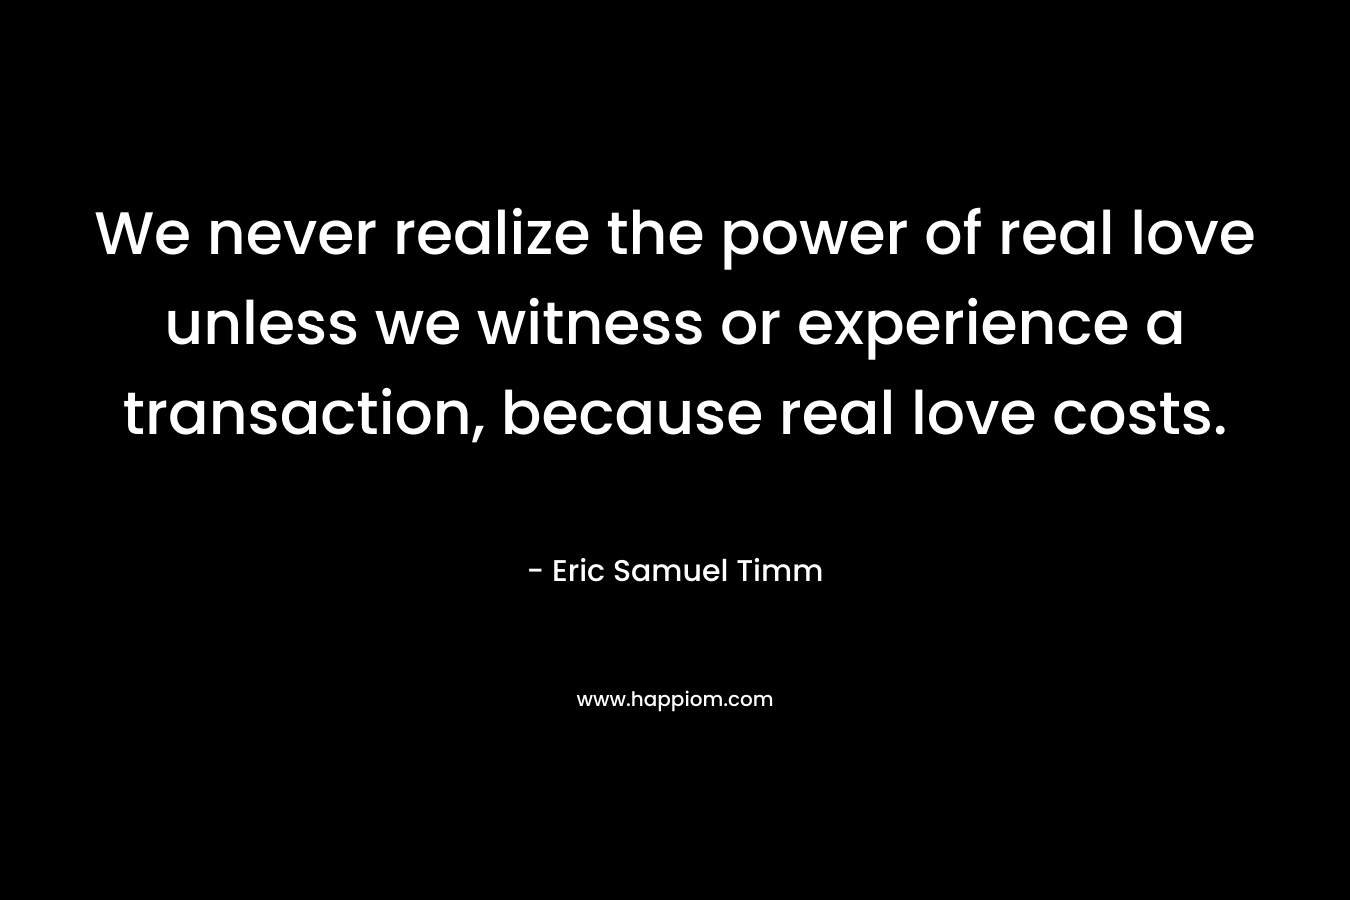 We never realize the power of real love unless we witness or experience a transaction, because real love costs. – Eric Samuel Timm